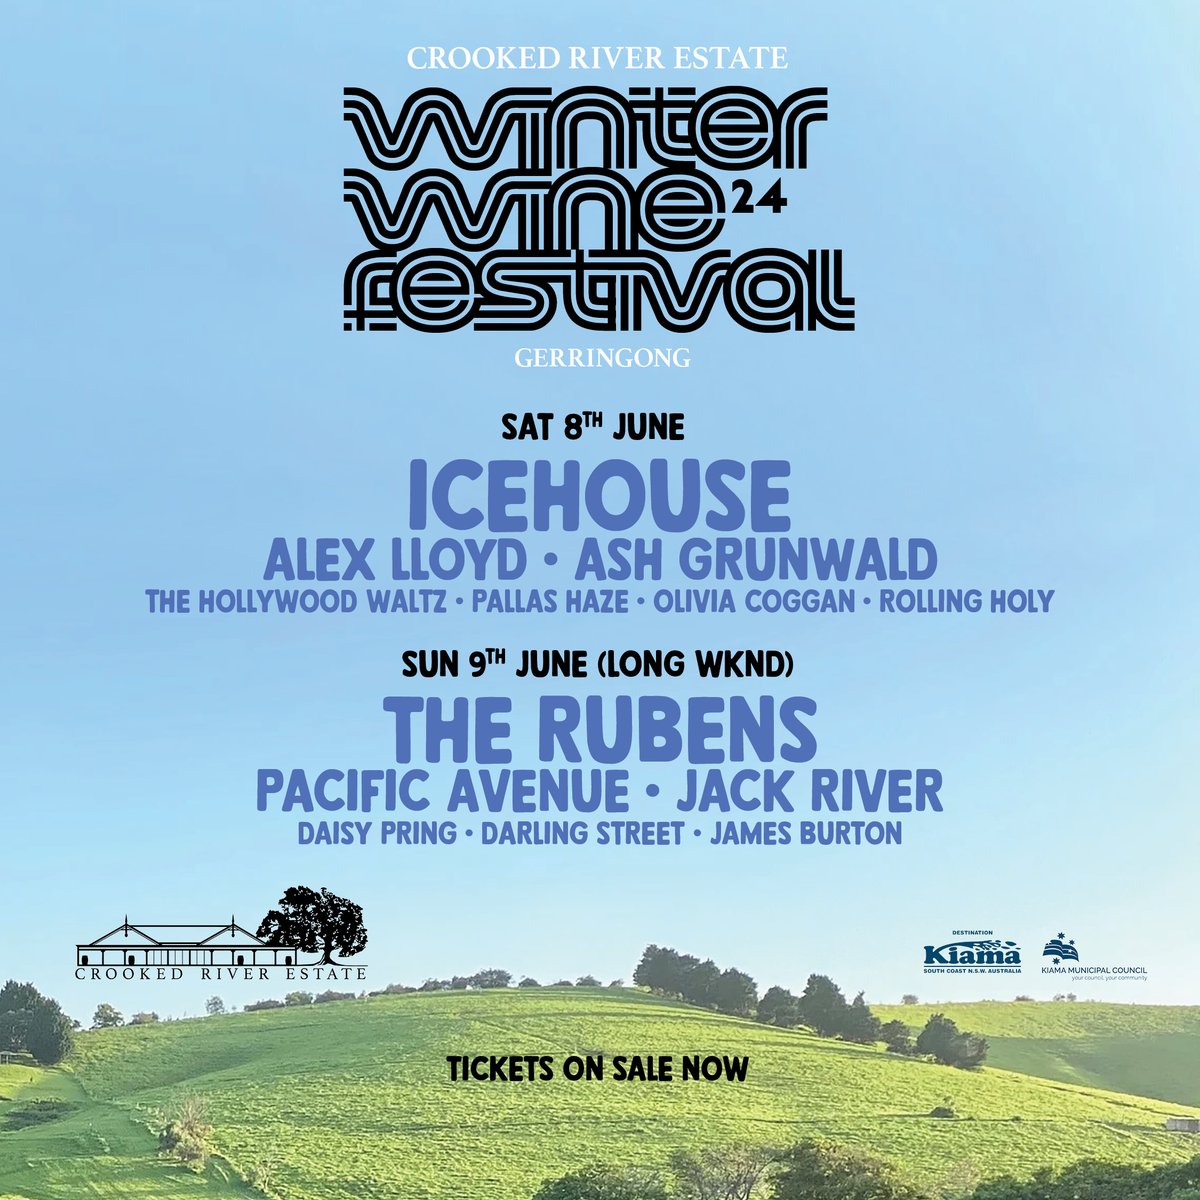 Hello! ICEHOUSE will be headlining the Winter Wine Festival at Crooked River Wines in Gerringong! The festival takes place over a long weekend, with ICEHOUSE taking the stage on Saturday, June 8th. Joining ICEHOUSE will be @alexlloydmusic, @AshGrunwald, The Hollywood Waltz,…